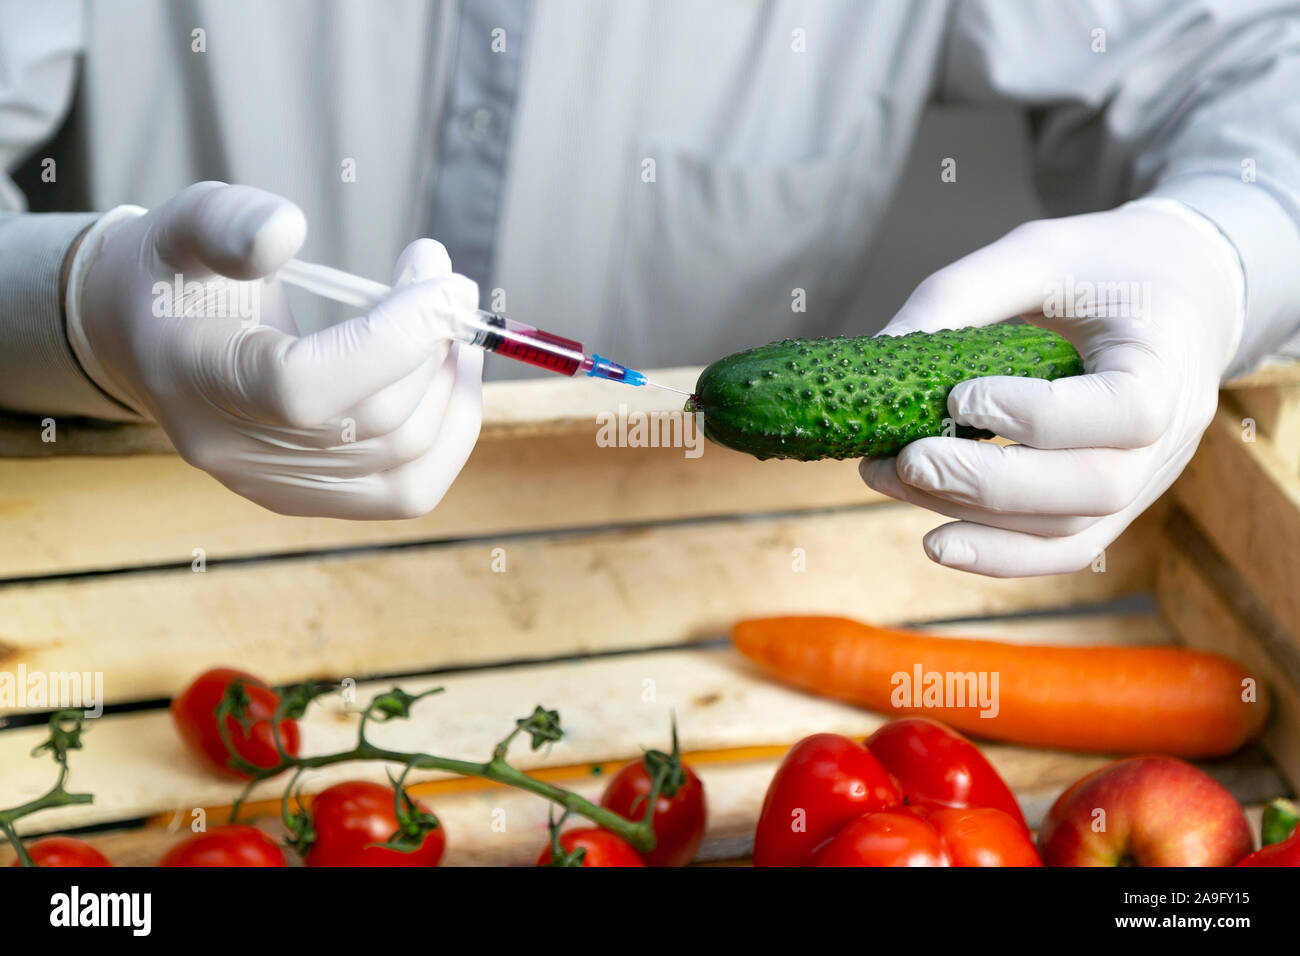 A man injects chemicals into a cucumber fertilizers and chemicals with a syringe to increase the shelf life of vegetables Stock Photo